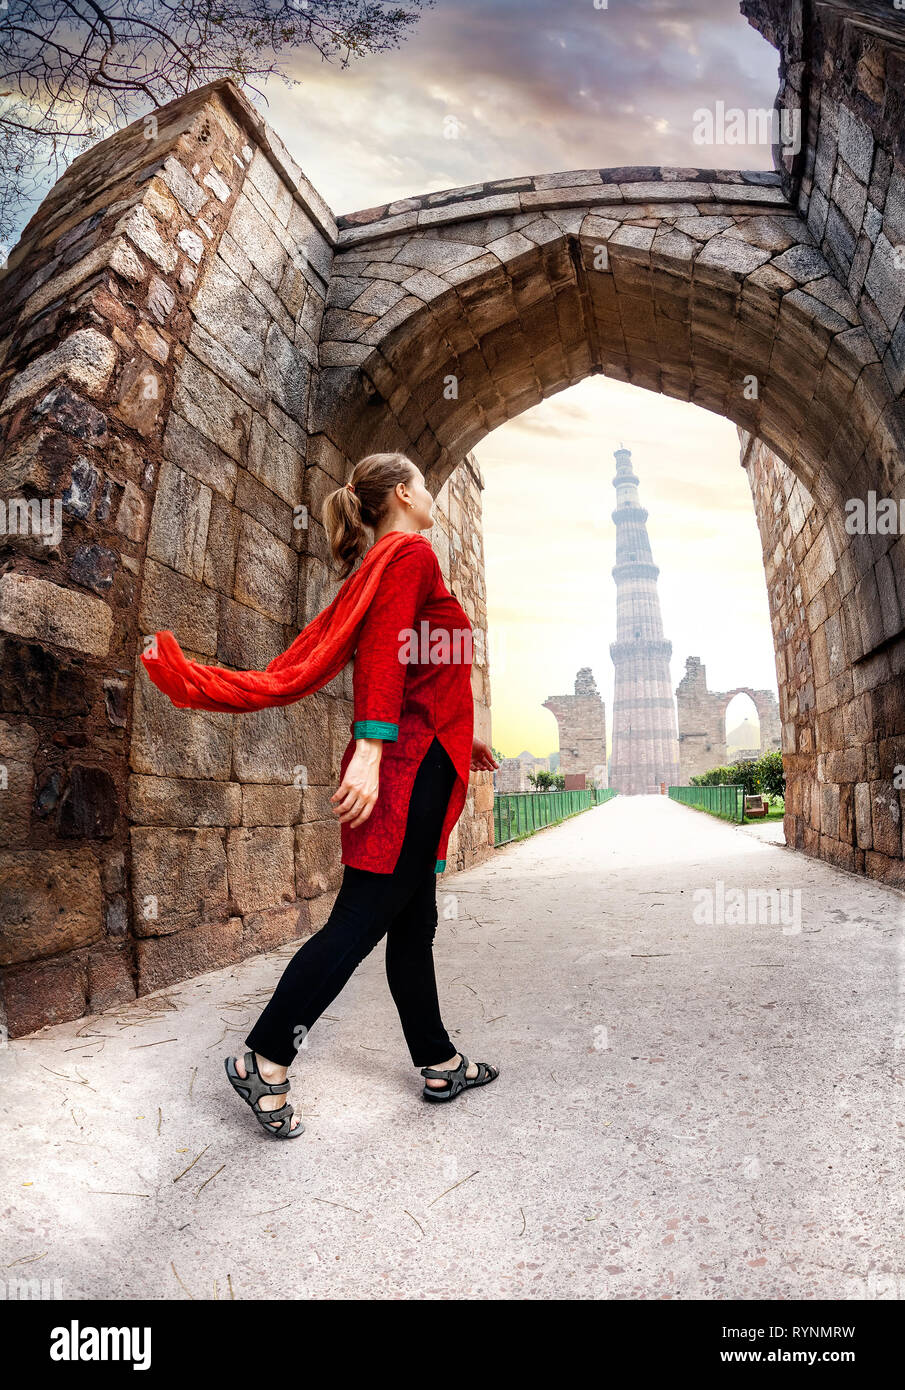 Woman in red costume going to Qutub Minar tower in Delhi, India Stock Photo